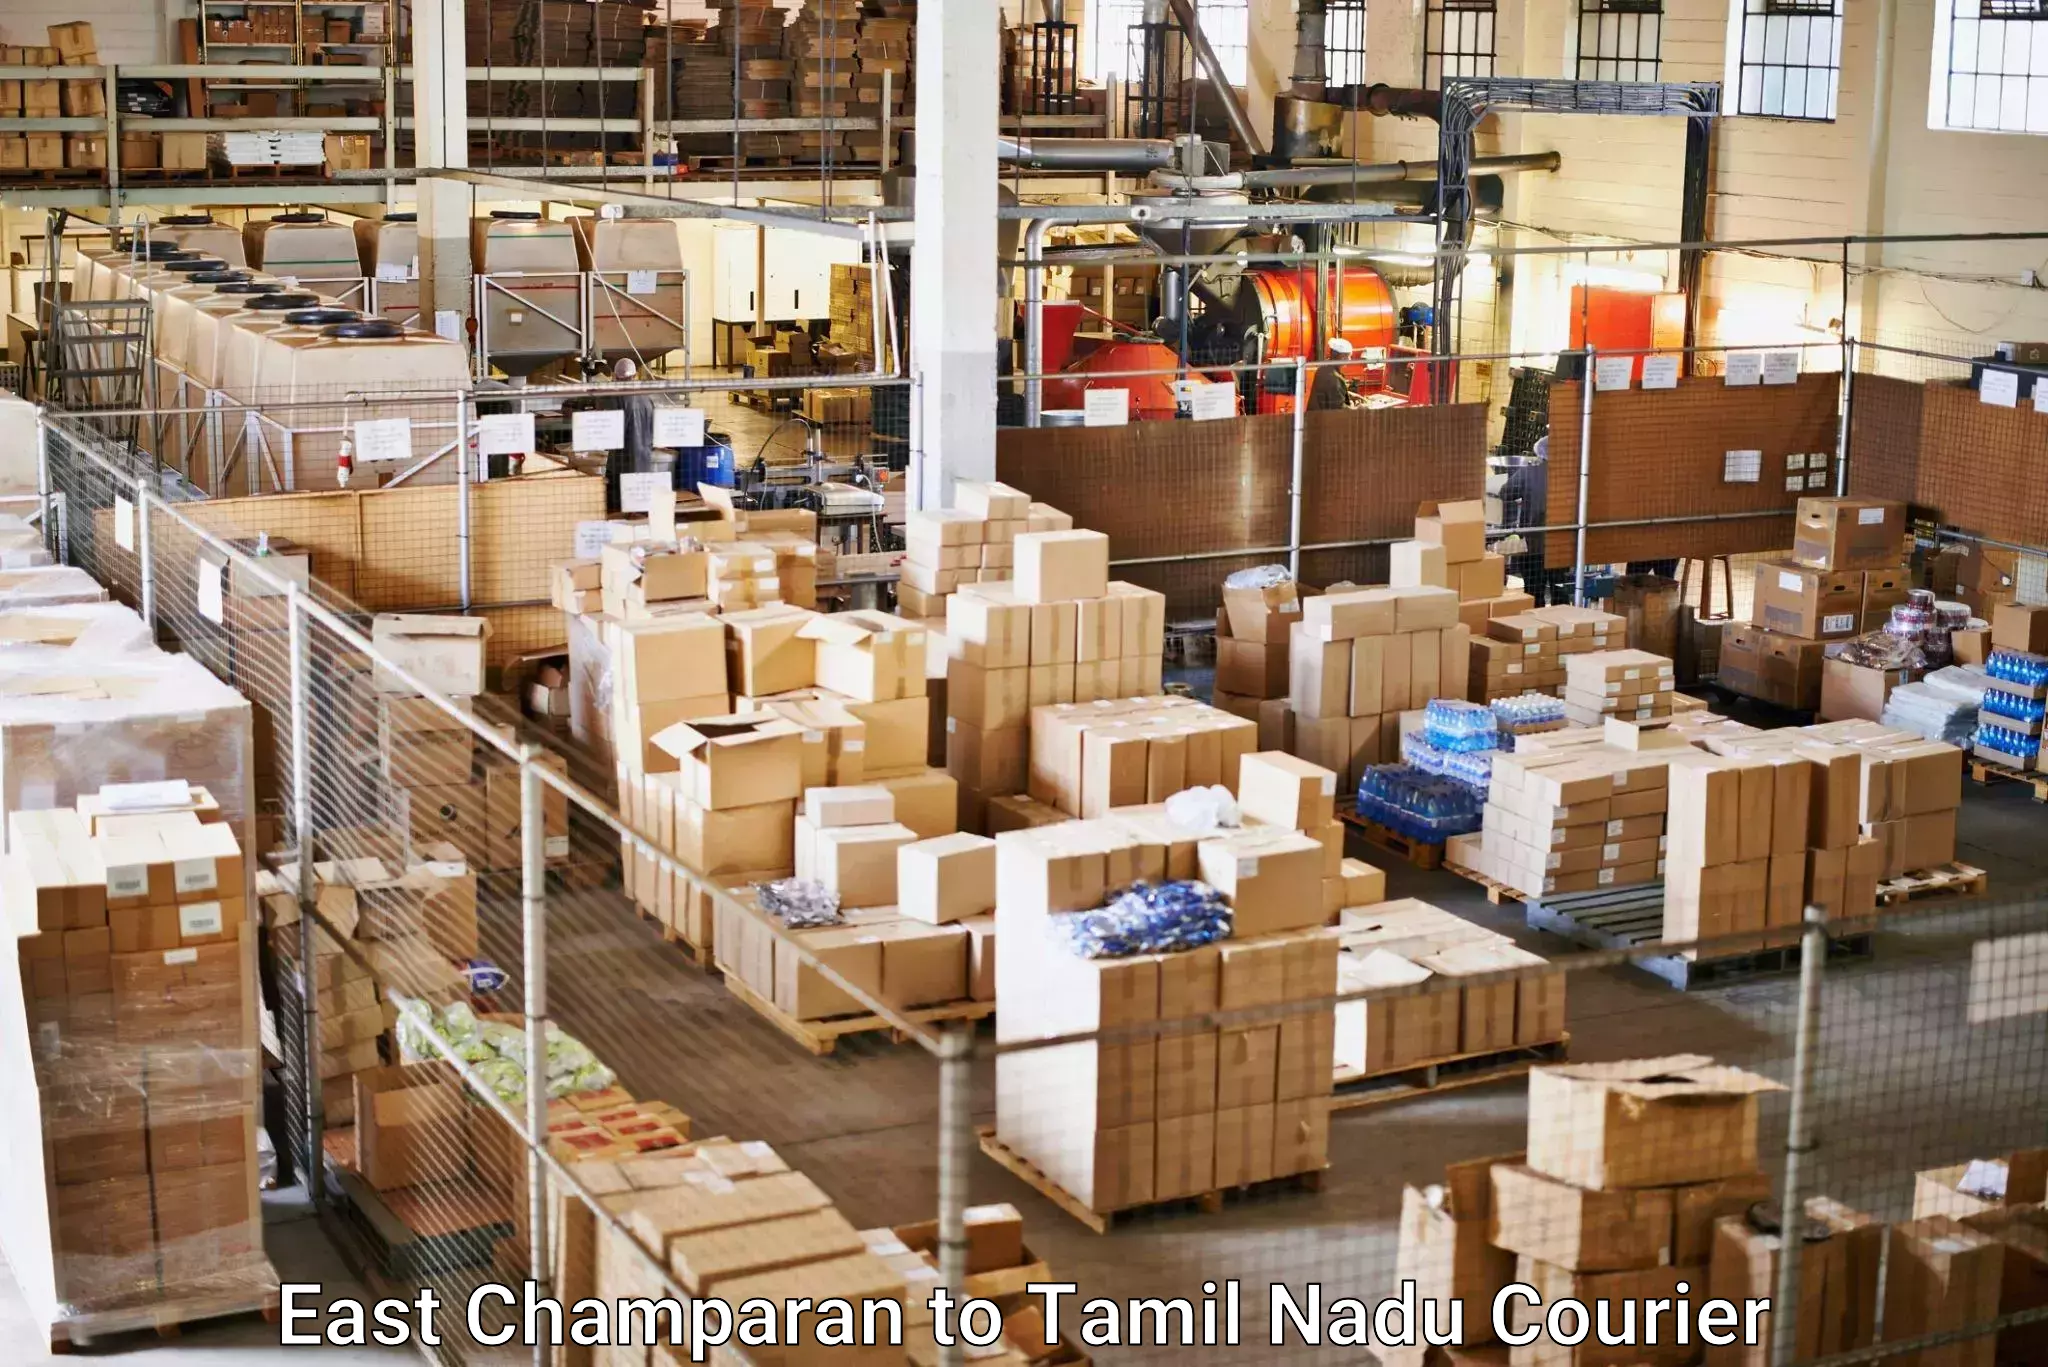 High-speed parcel service East Champaran to Ottapidaram